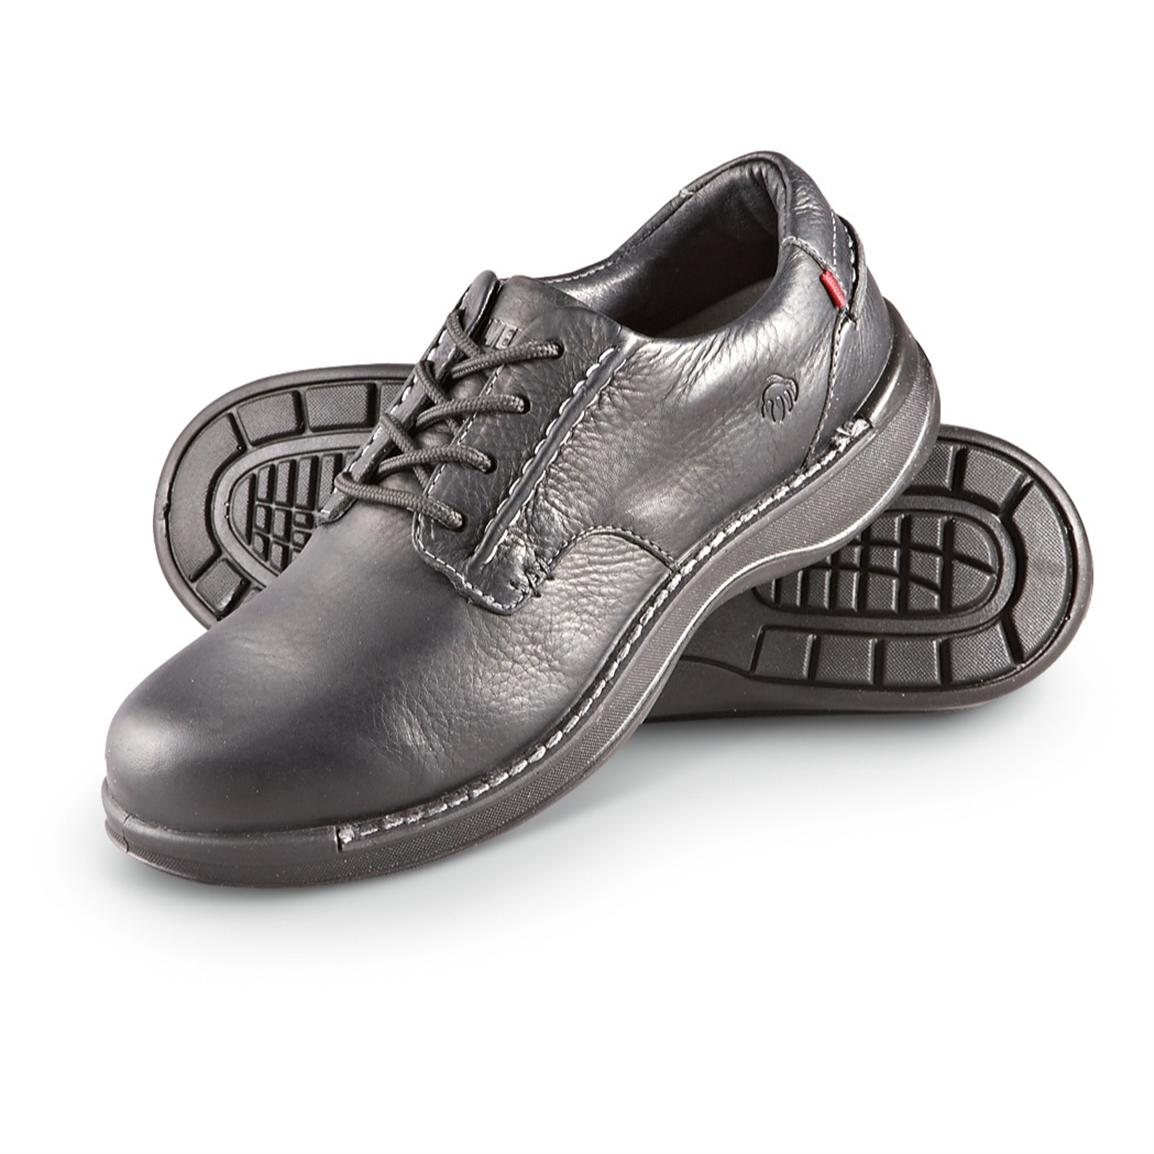 wolverine oxford shoes